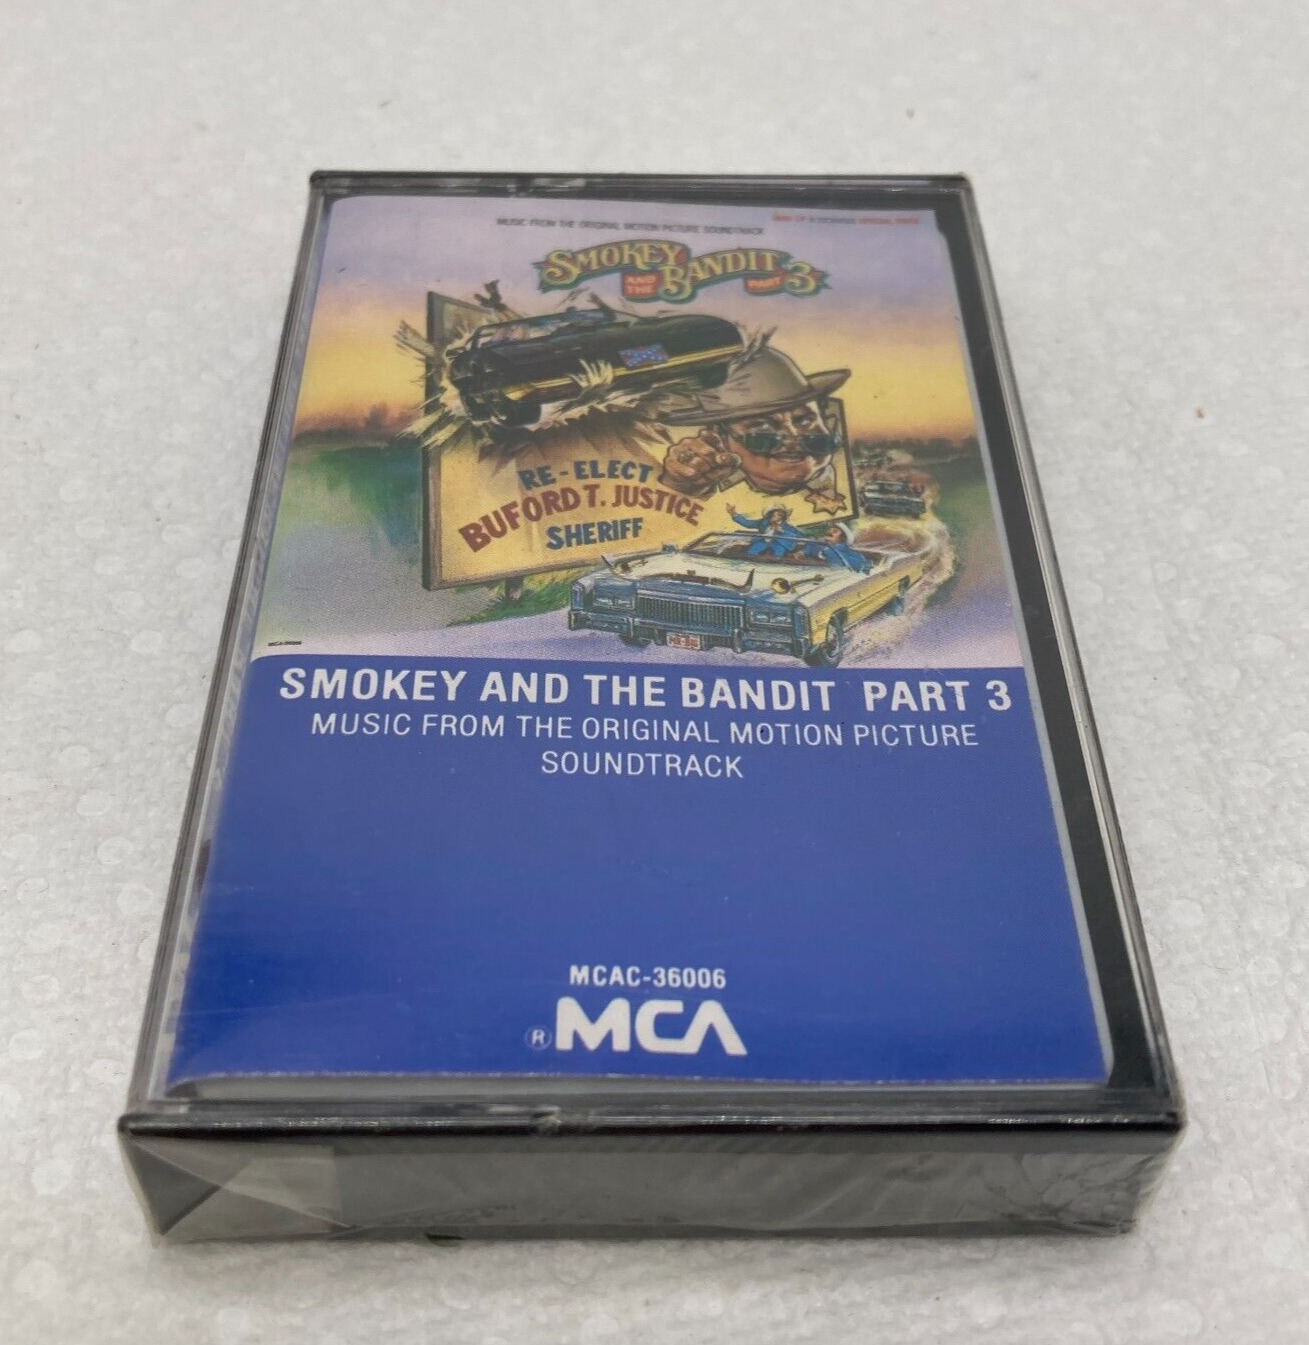 NEW SEALED SMOKEY AND THE BANDIT PART 3 Original Soundtrack Cassette Tape RARE